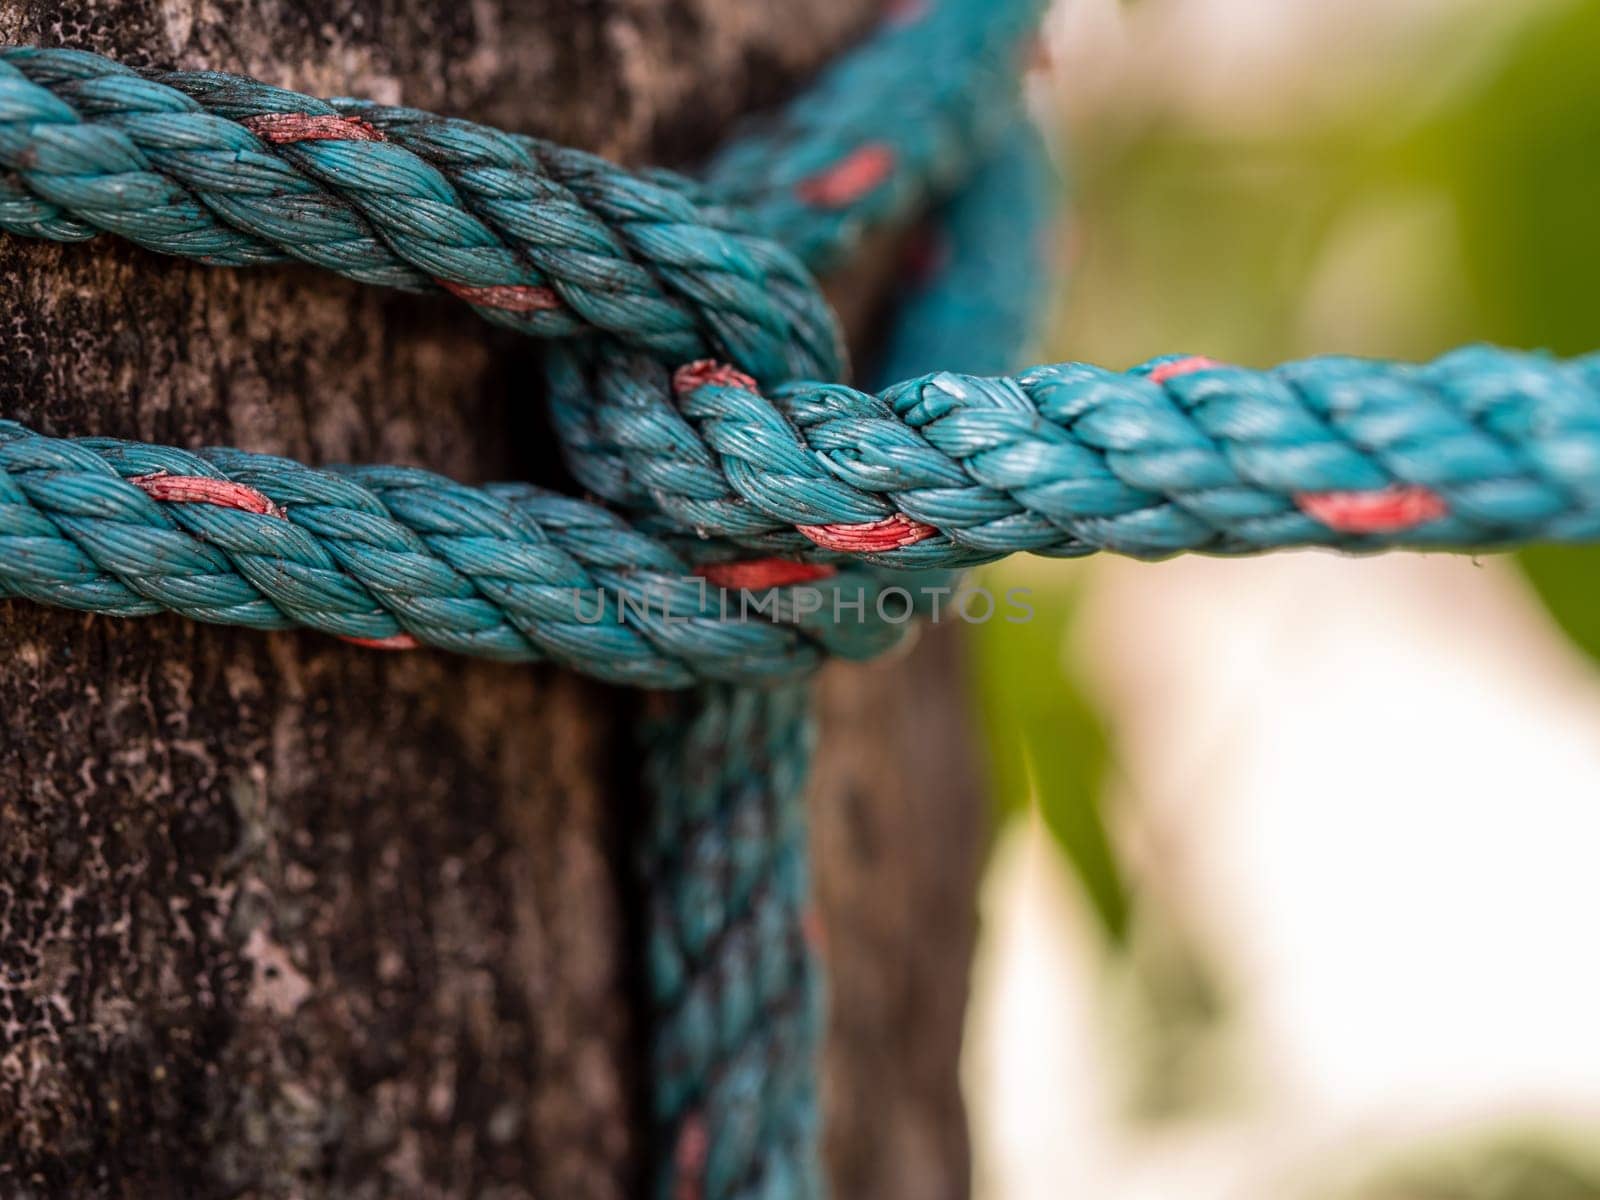 The nylon rope was tightly tied to the big tree by Satakorn